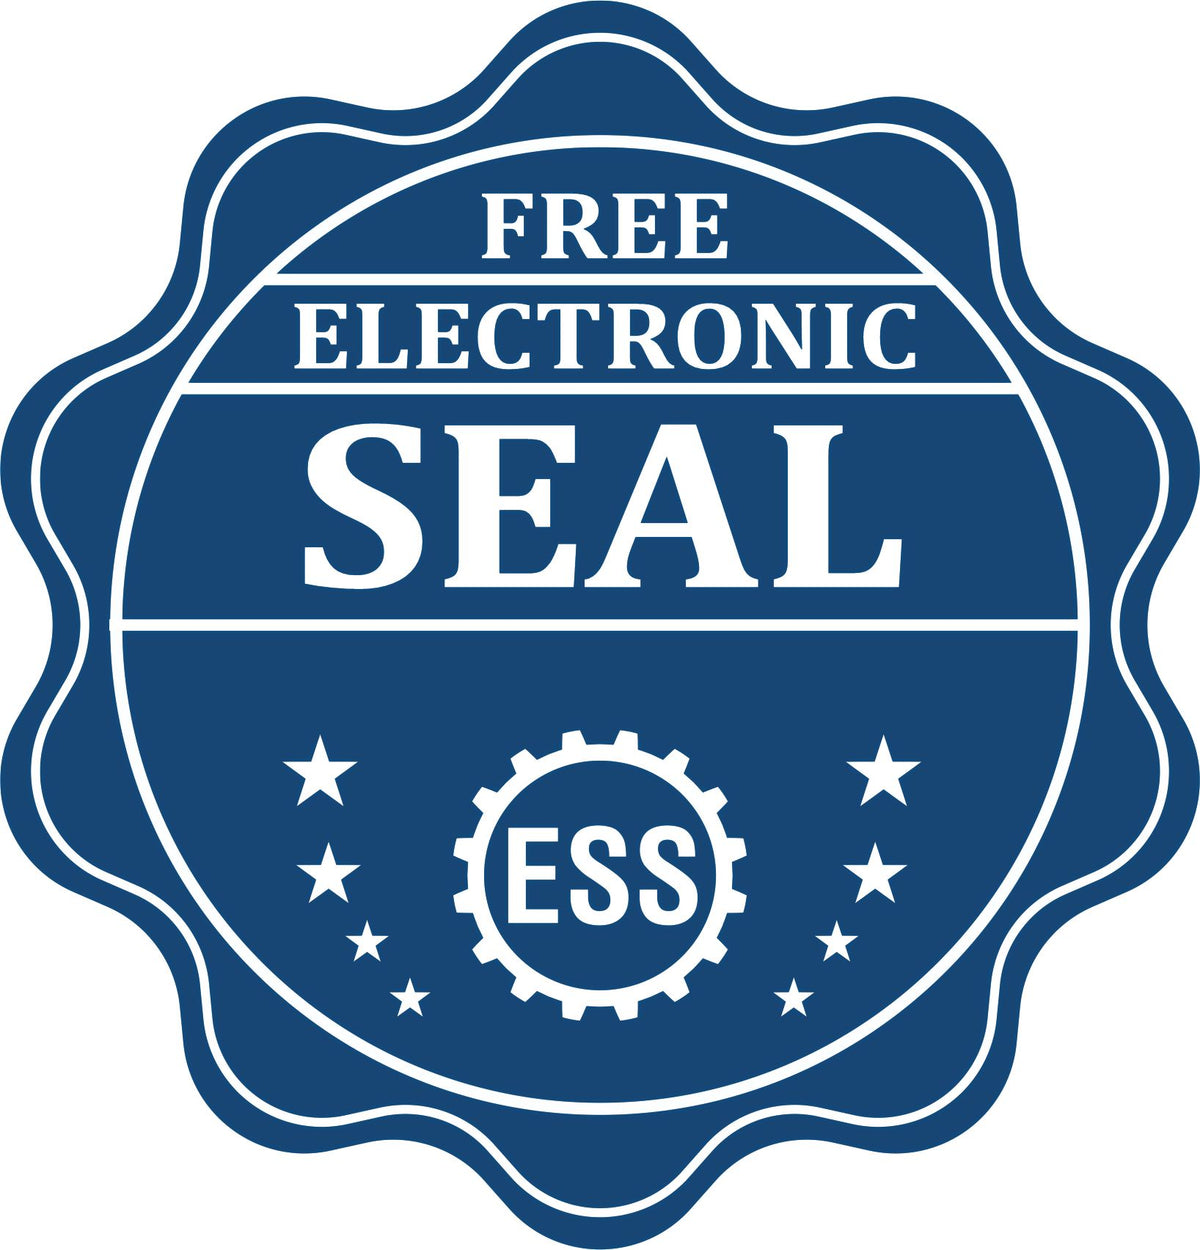 A badge showing a free electronic seal for the Handheld South Carolina Professional Engineer Embosser with stars and the ESS gear on the emblem.